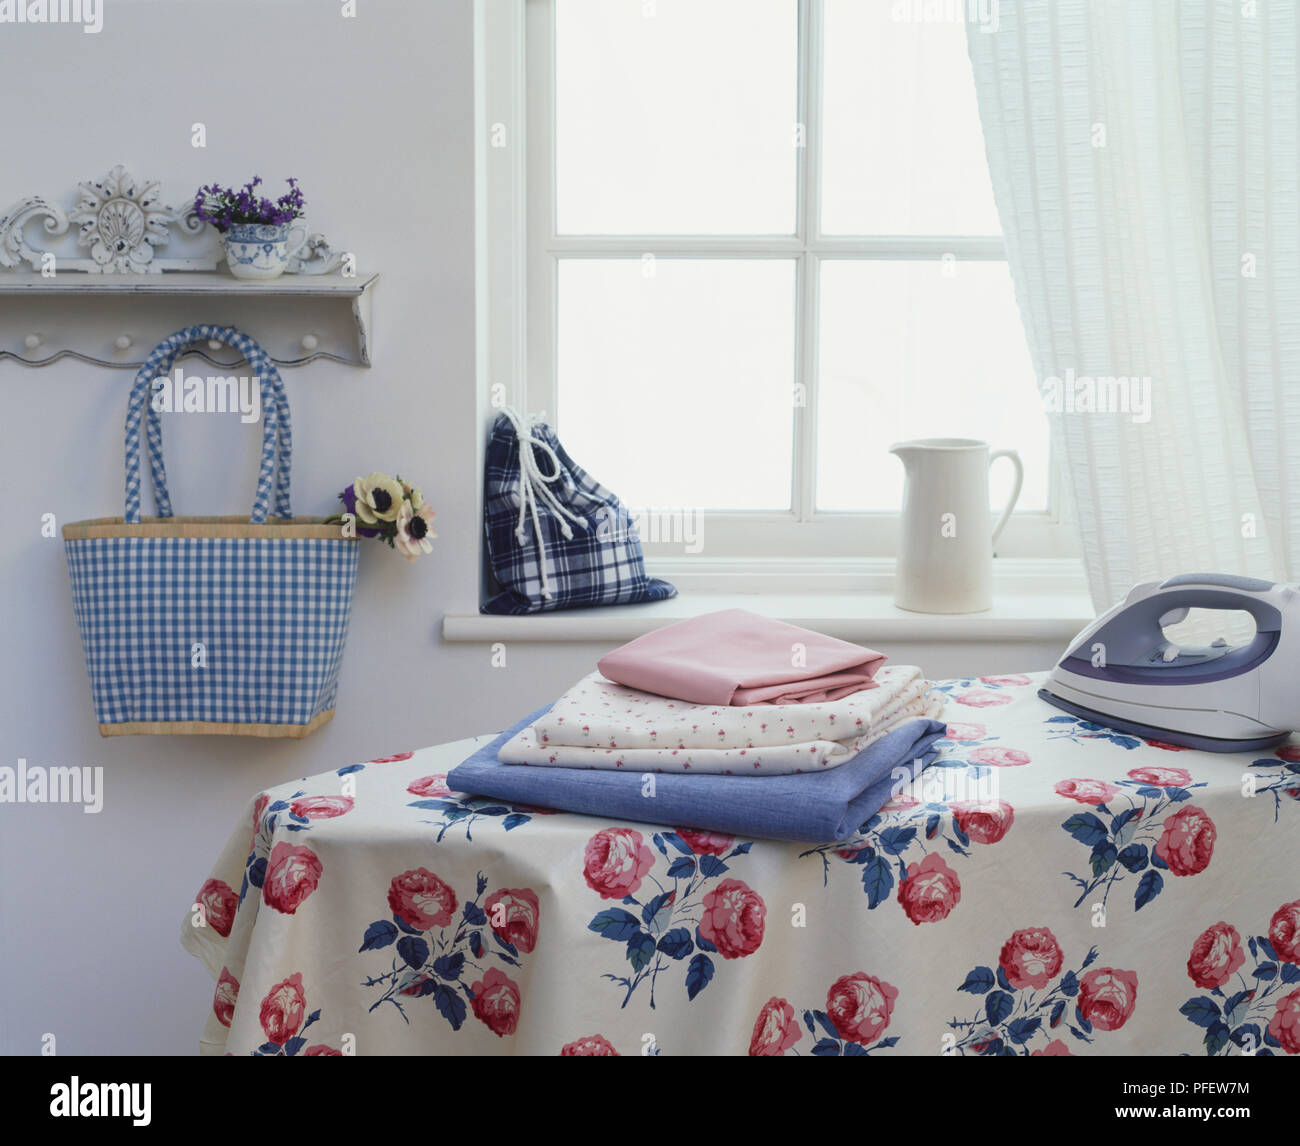 Rose patterned material draped over ironing board, folded fabrics and iron placed on top, chequered and tartan bags displayed in background, side view Stock Photo